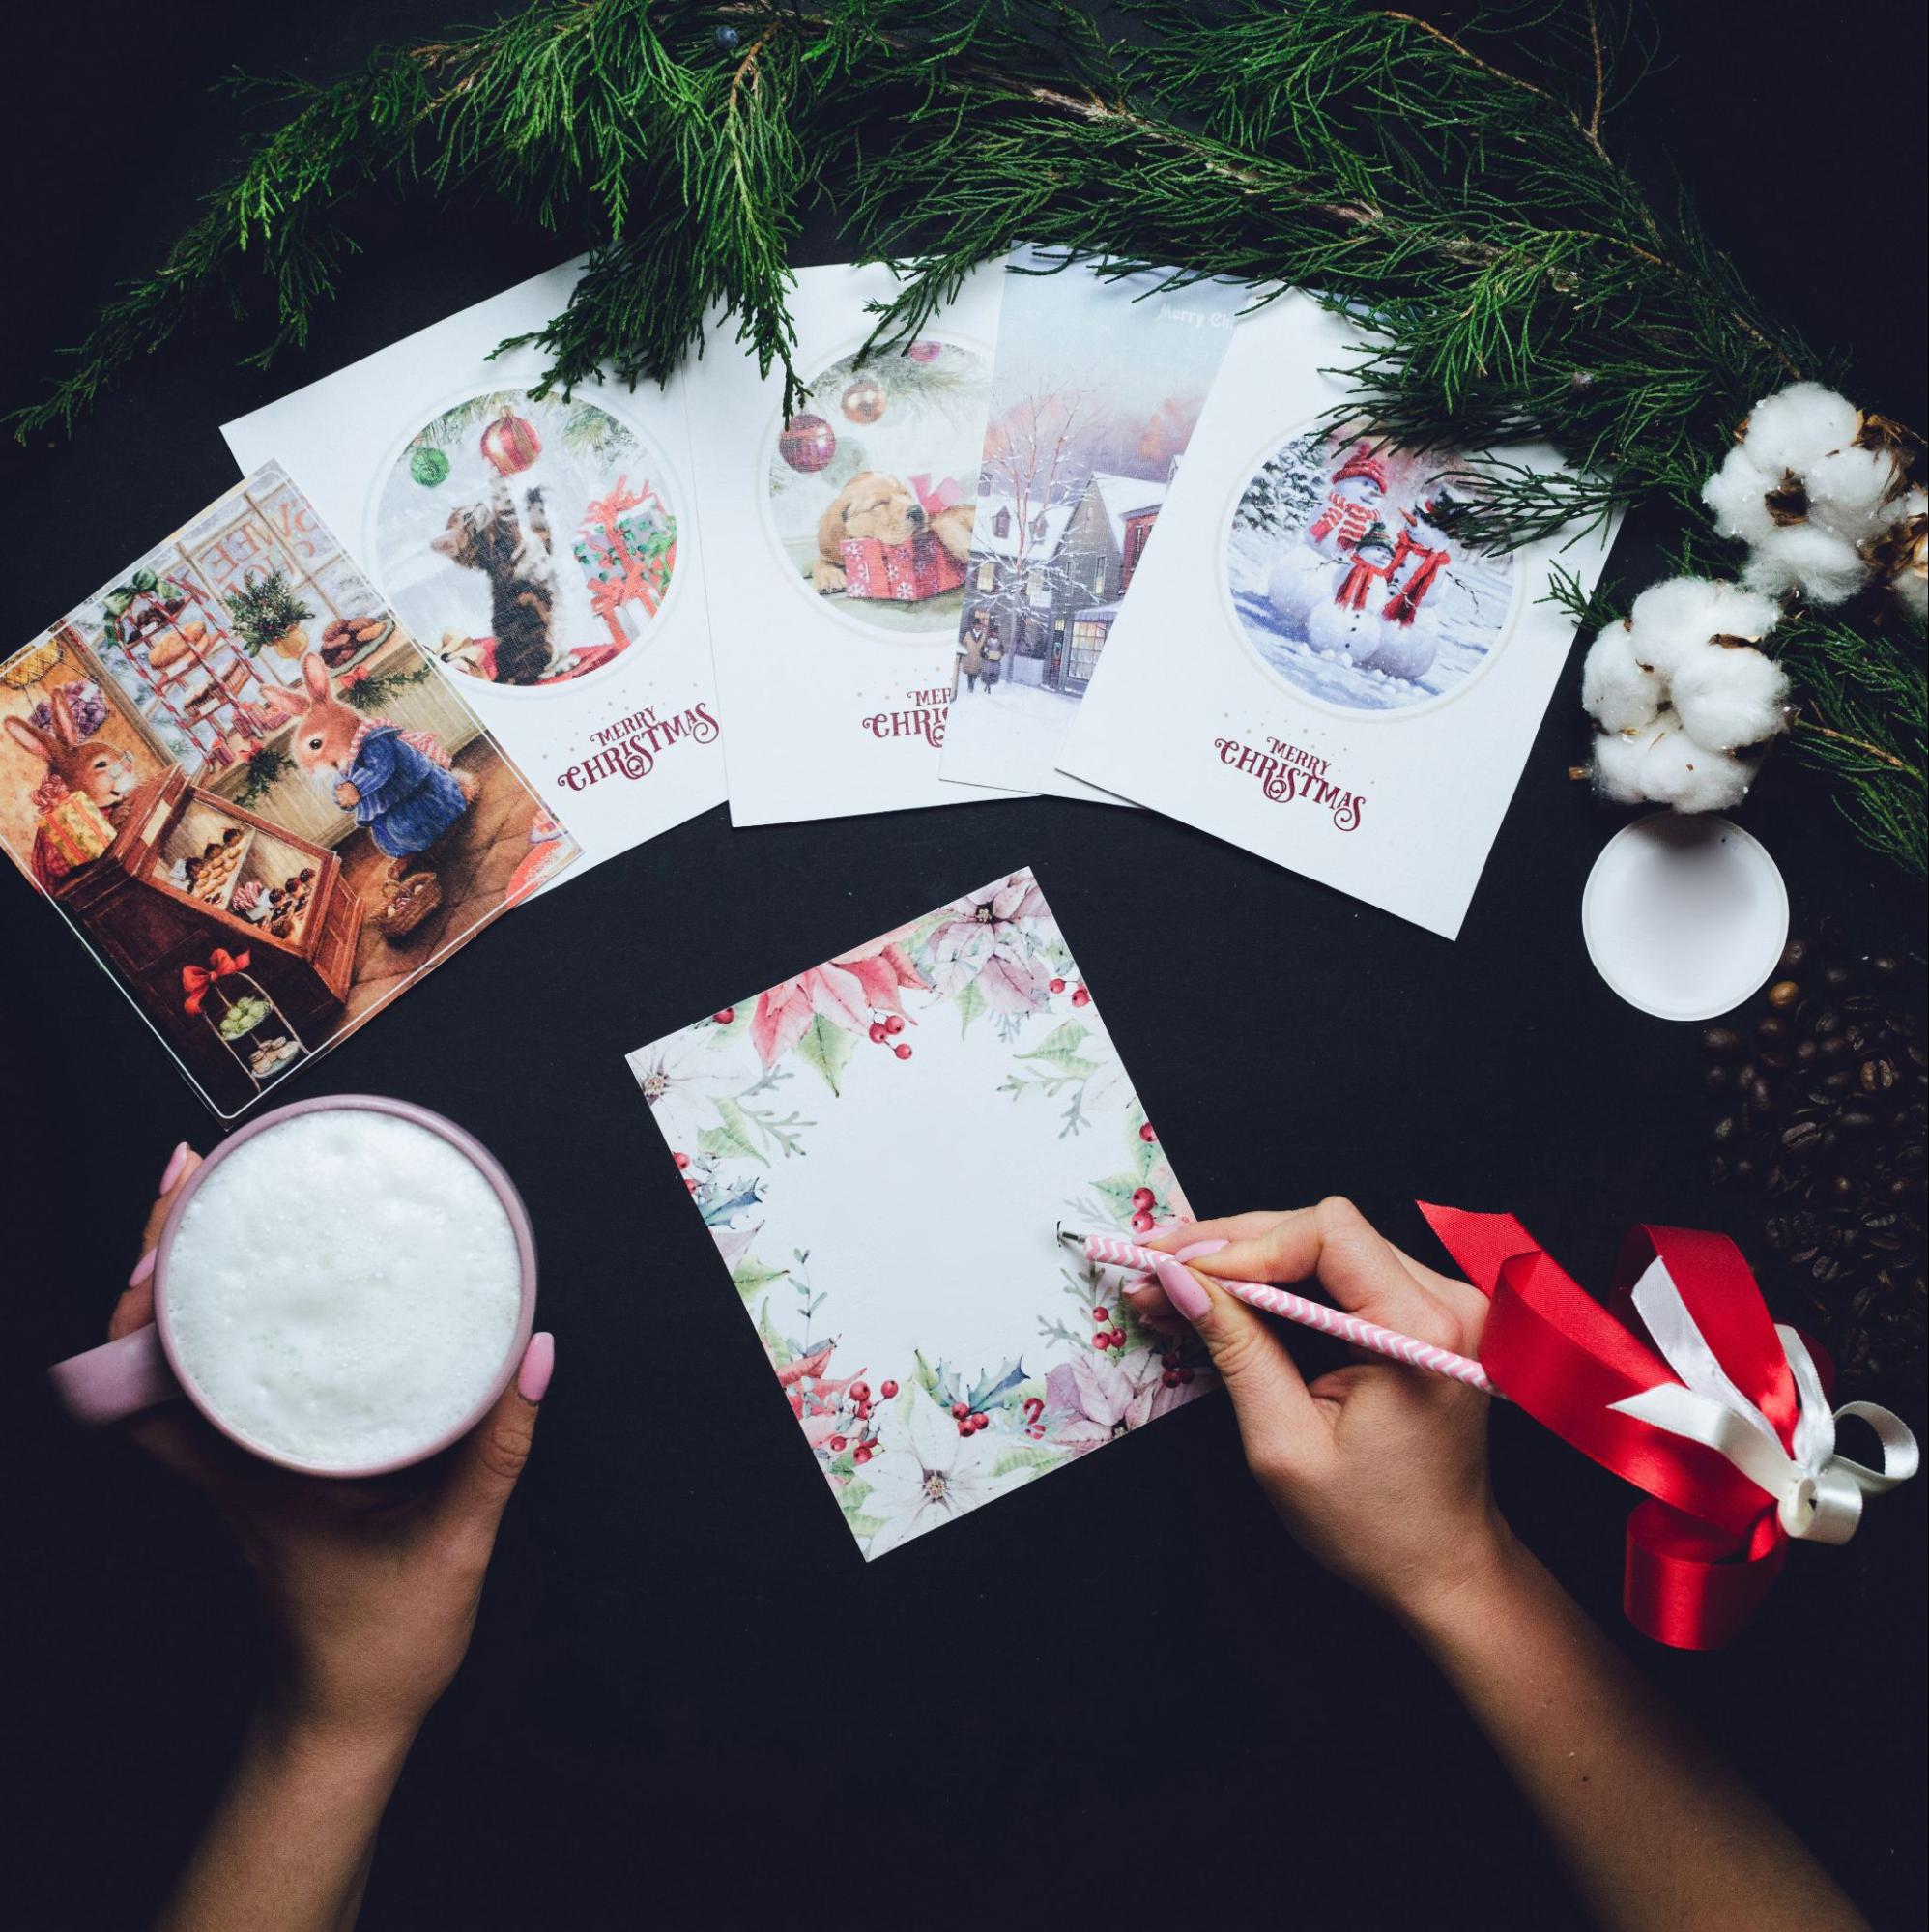 -Festive coffee break with Christmas cards and tree decorations